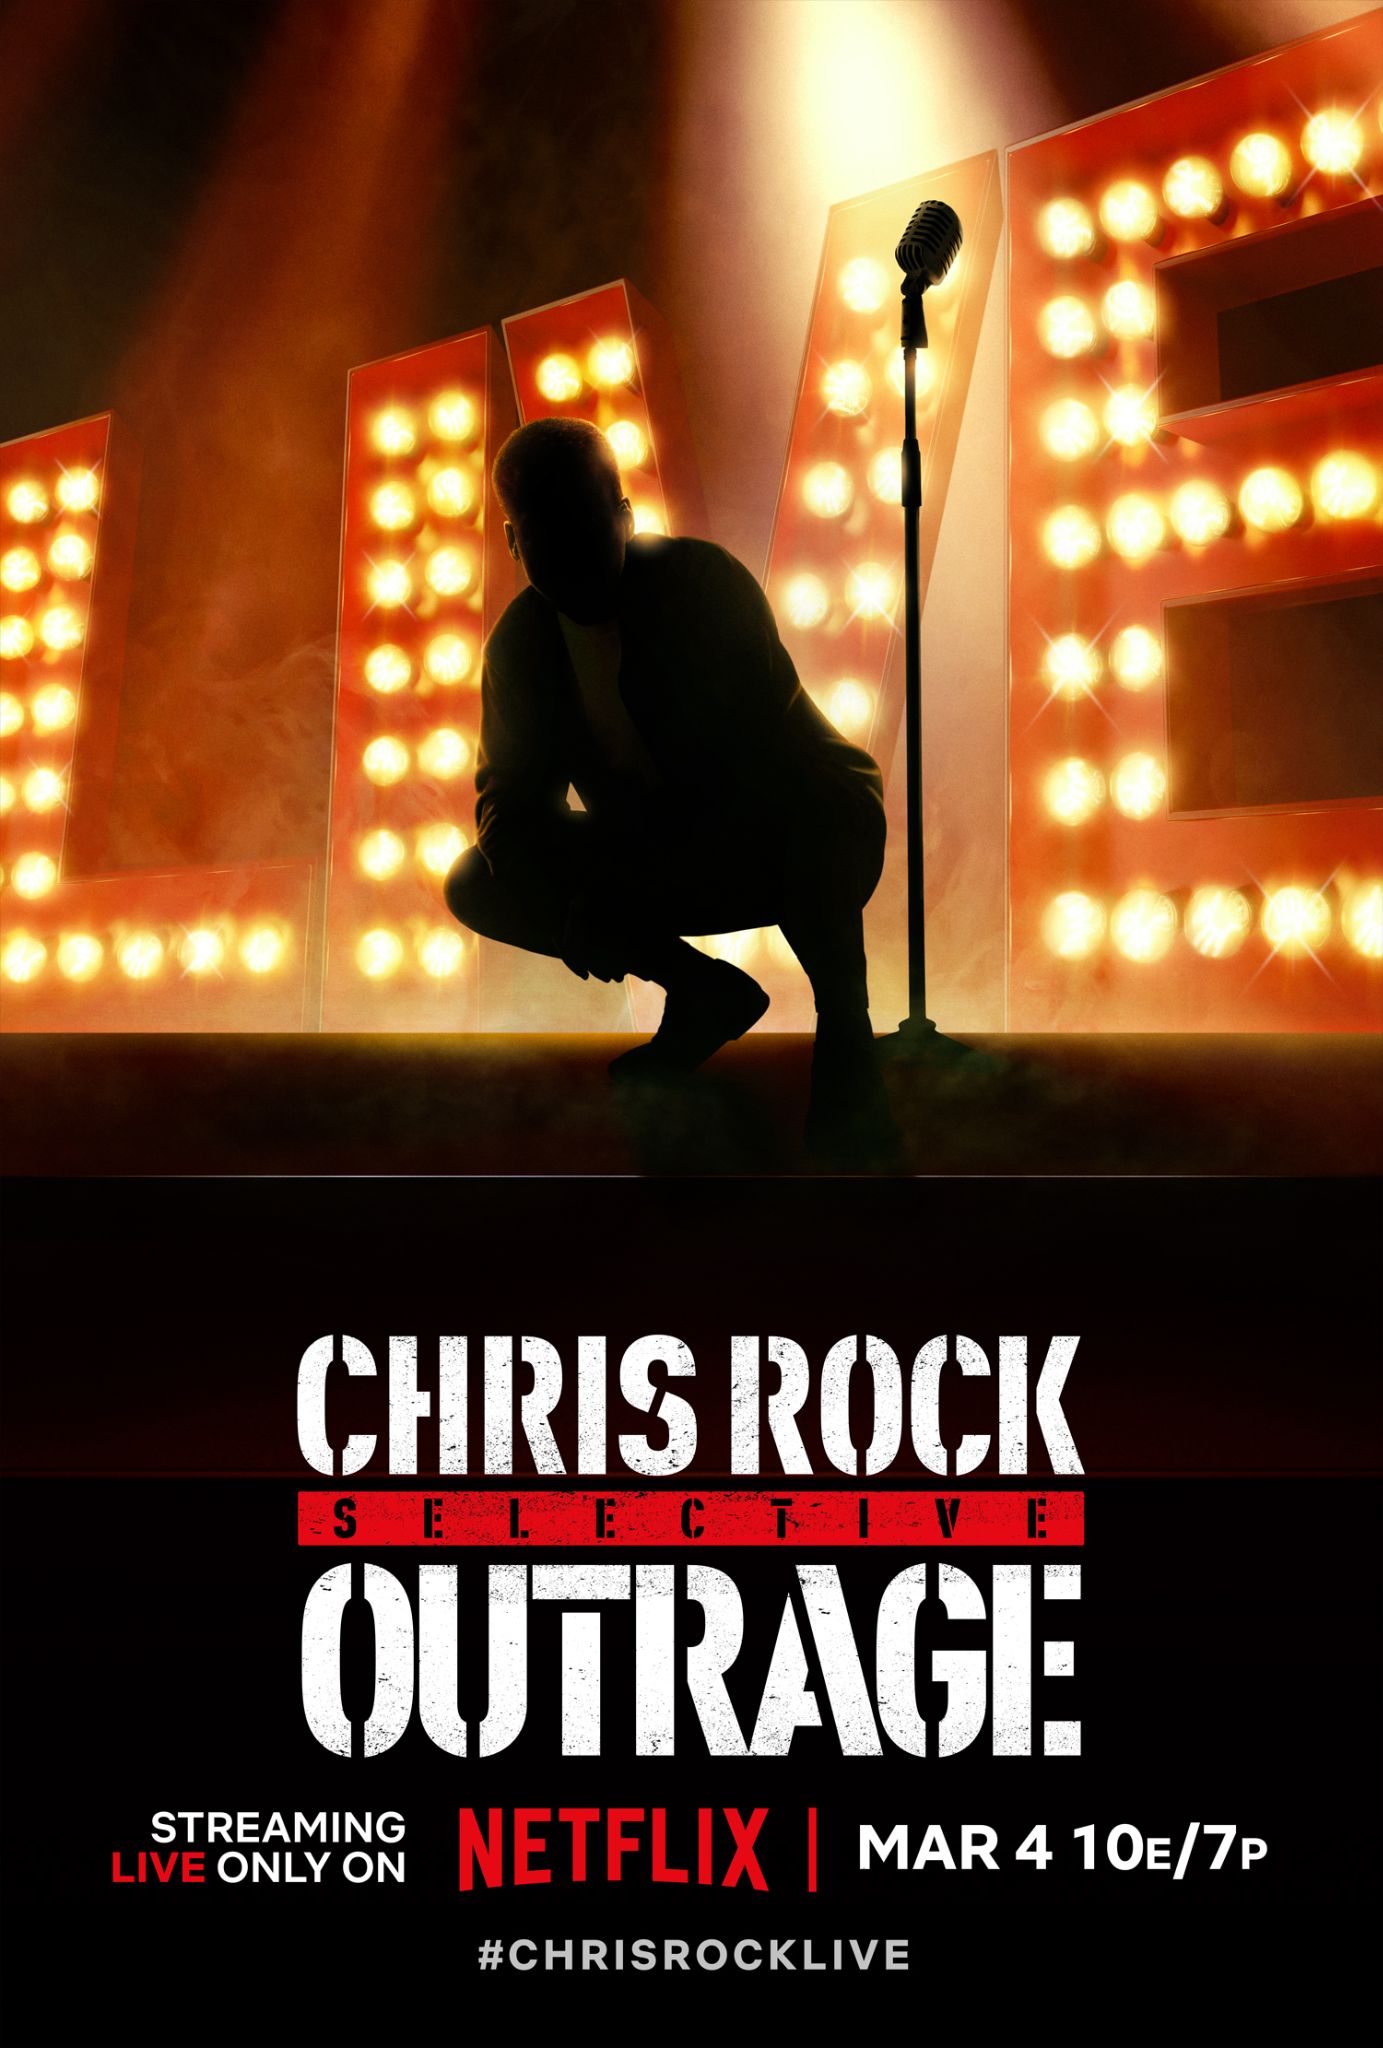 https://www.wikirise.com/wp-content/uploads/2022/12/1672270715_688_Chris-Rock-Selective-Outrage-Is-Netflixs-First-Live-Comedy-Special.jpg